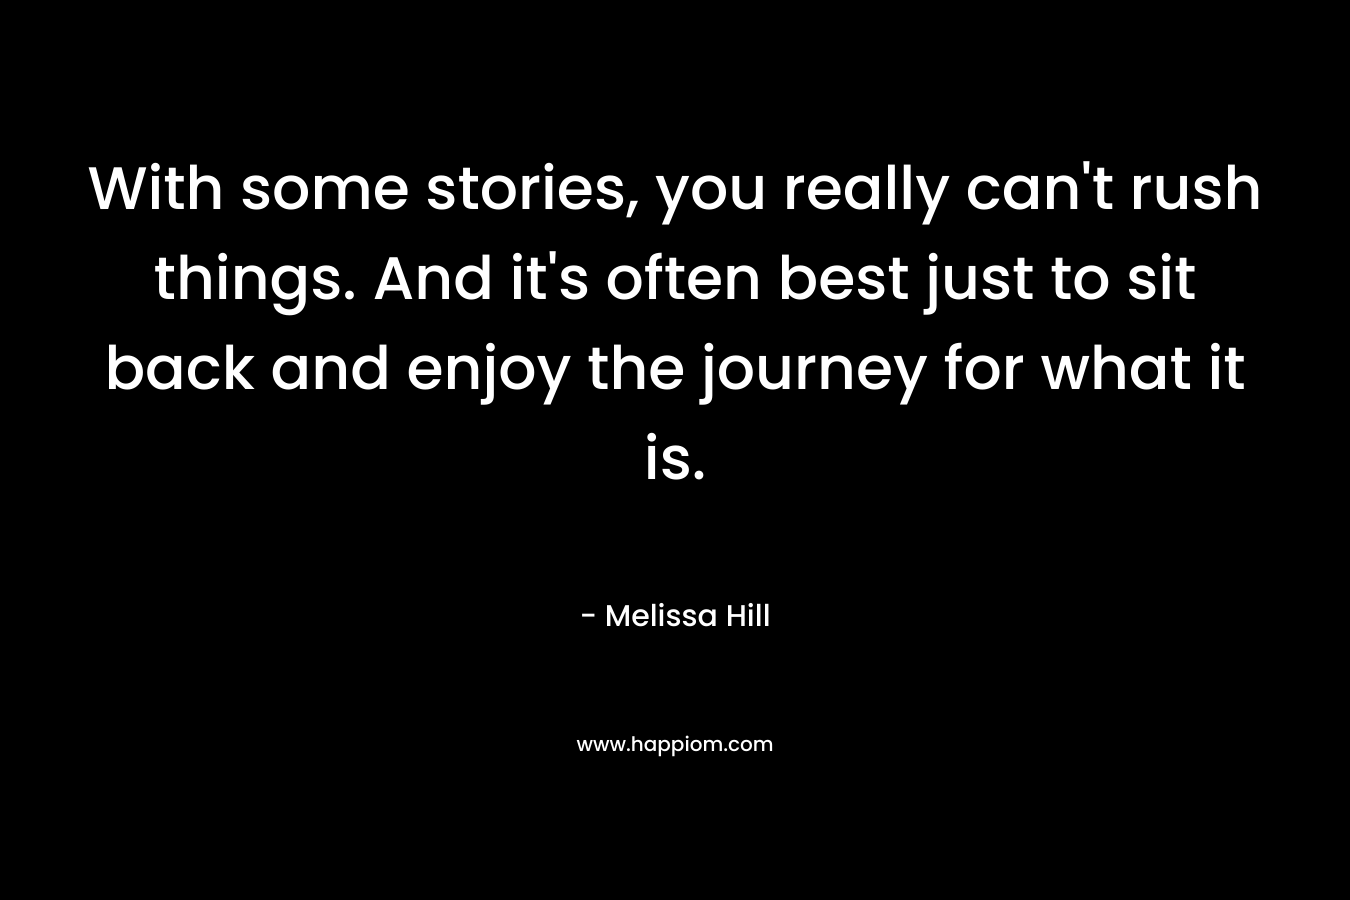 With some stories, you really can't rush things. And it's often best just to sit back and enjoy the journey for what it is.